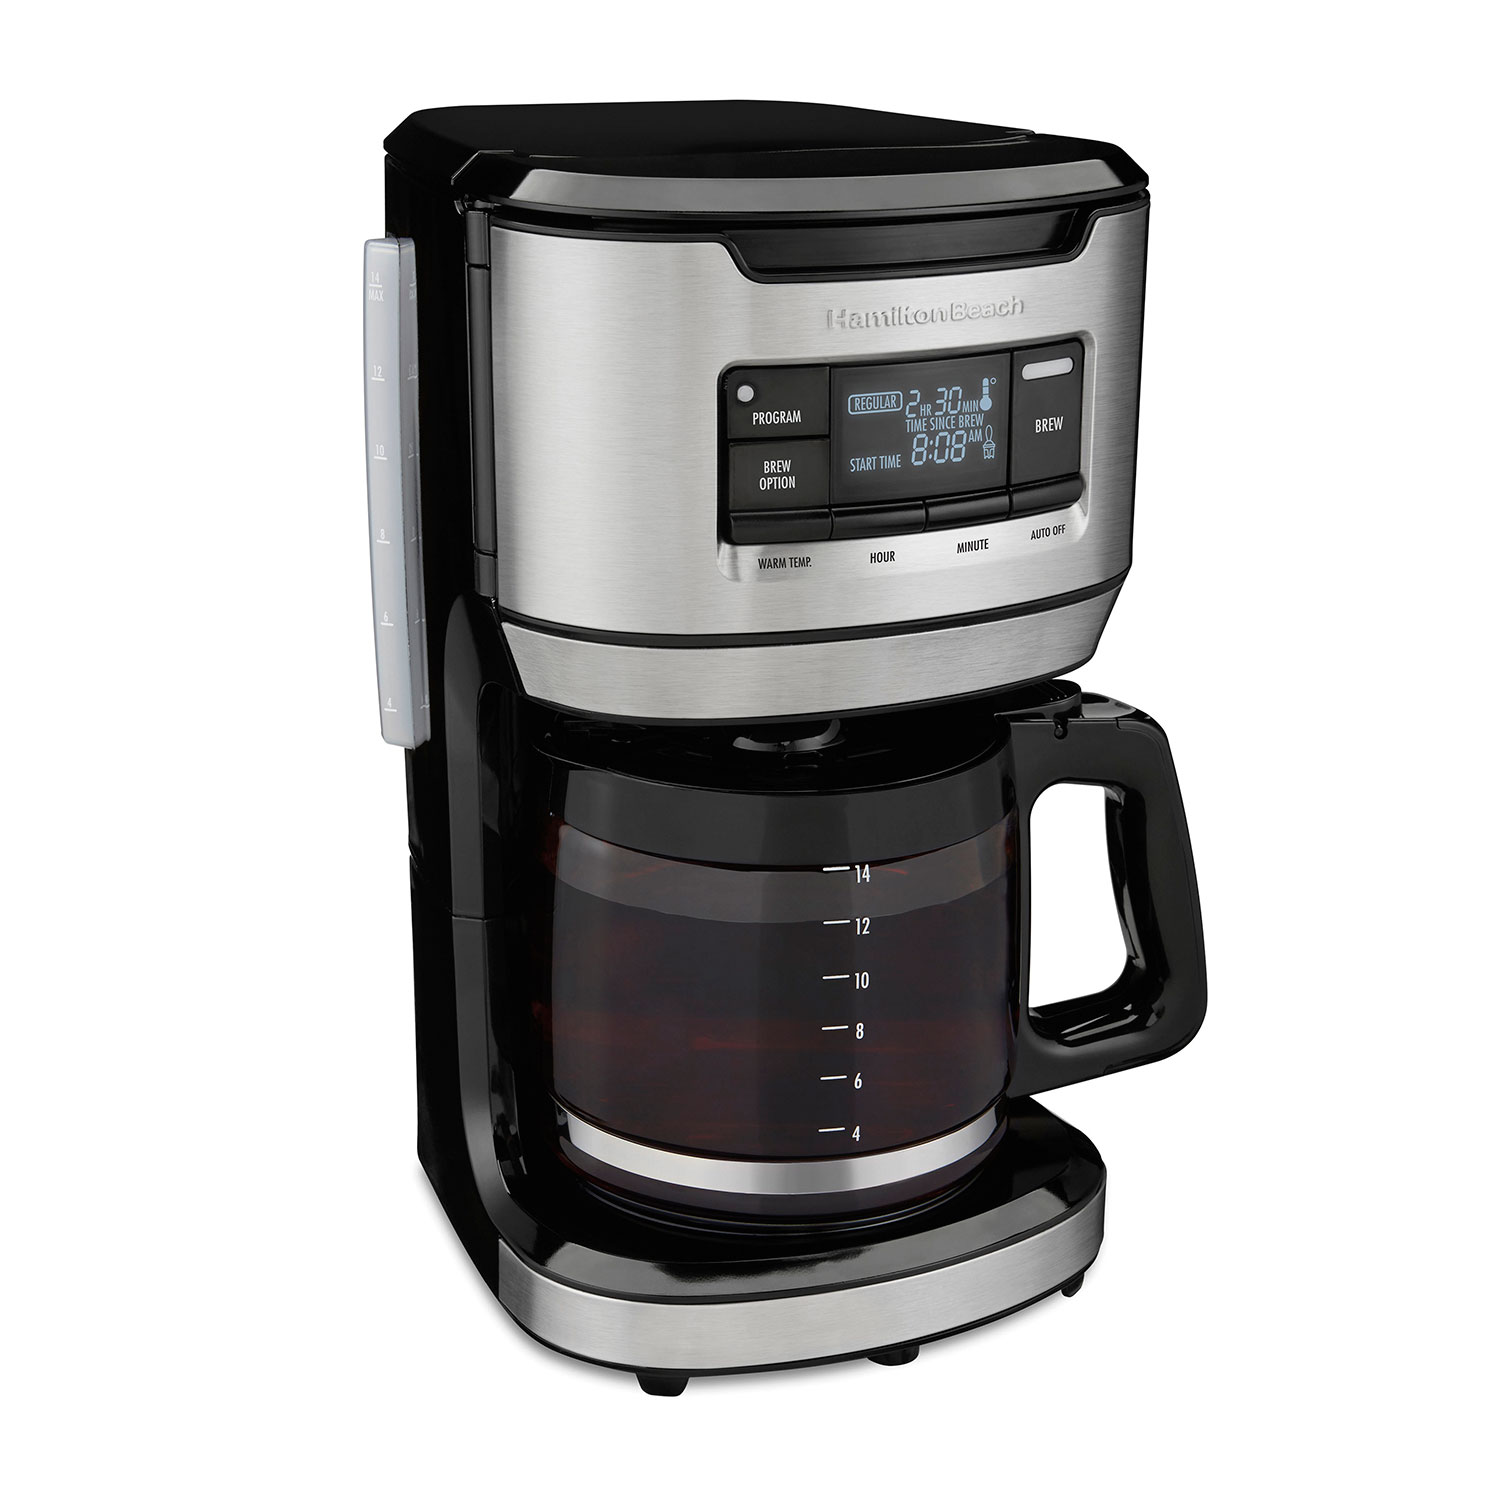 FrontFill® 14 Cup Programmable Coffee Maker (46392)